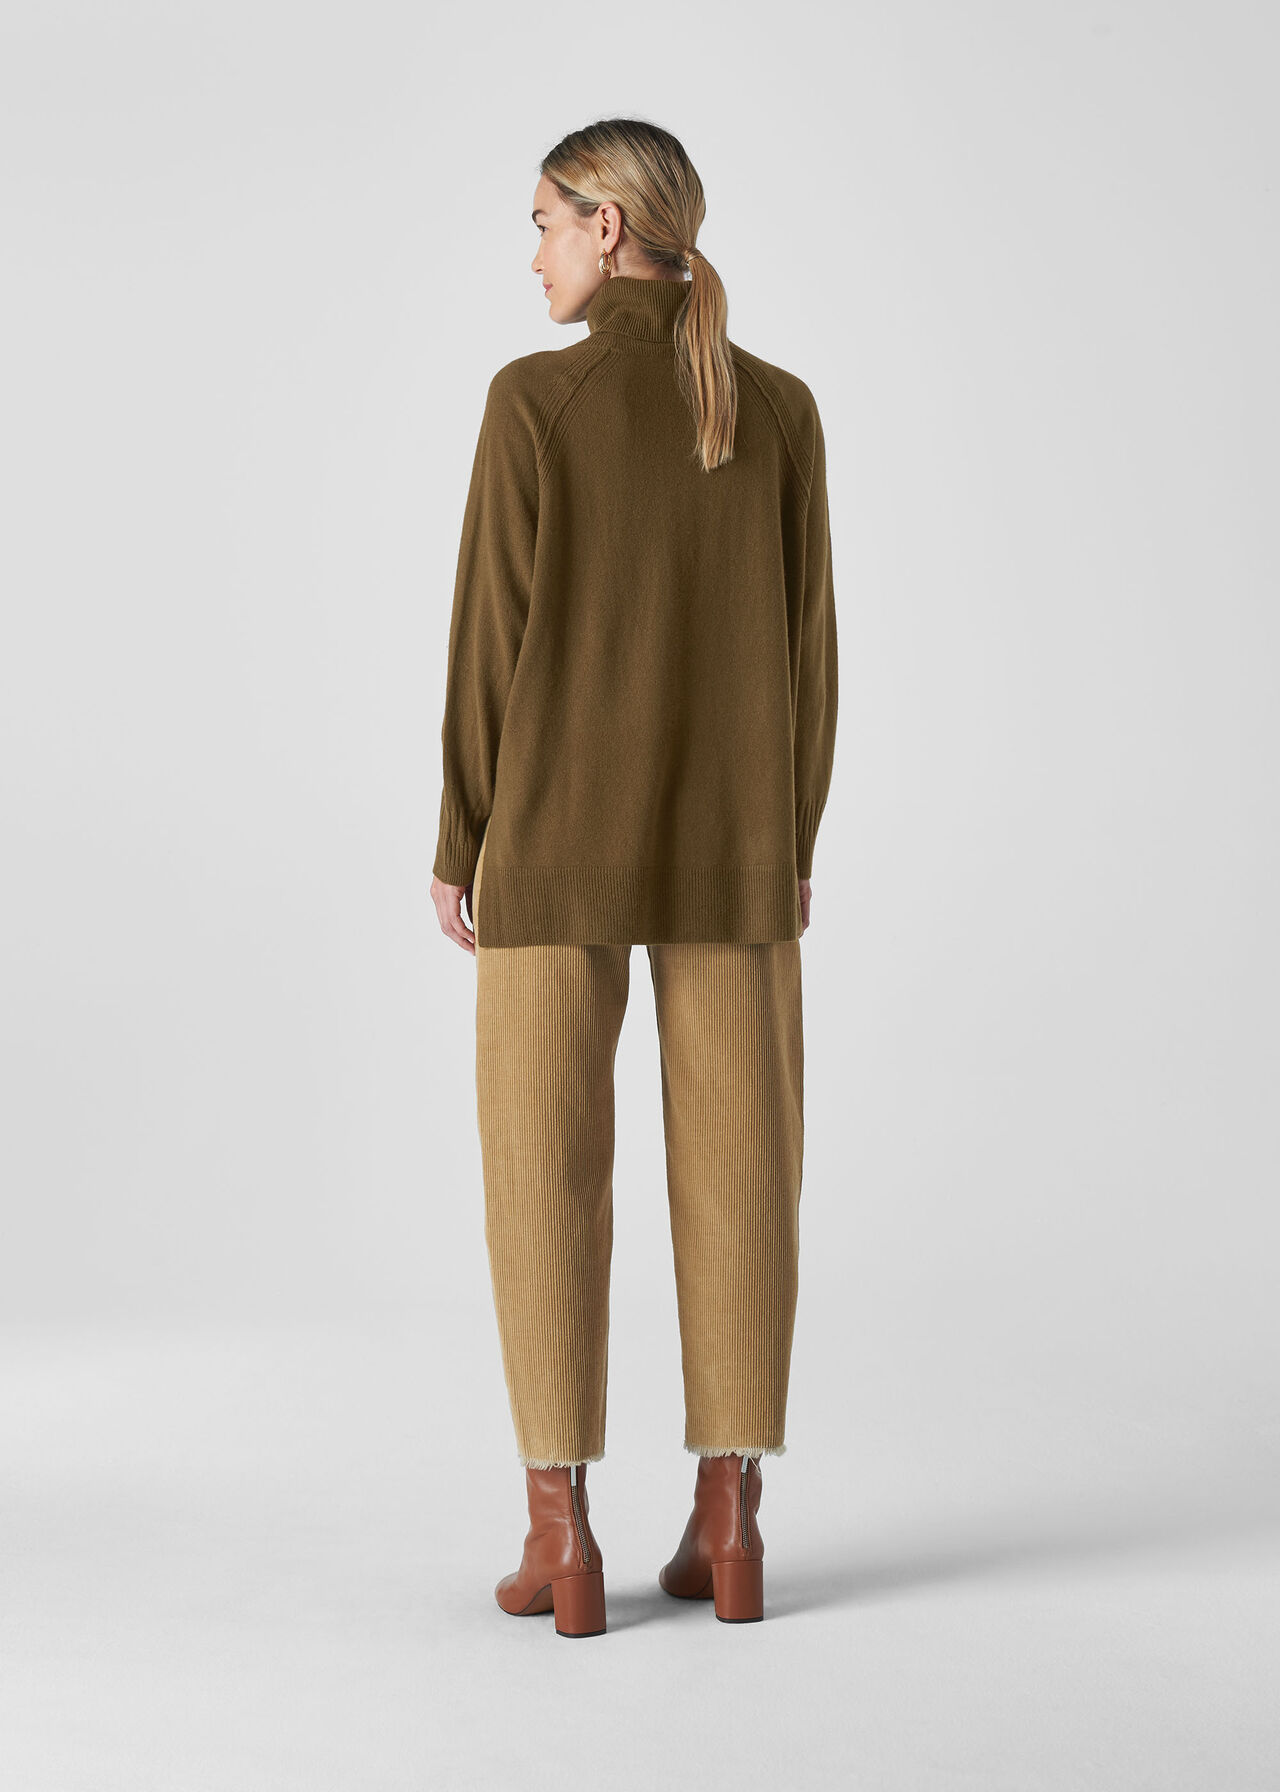 Cashmere Roll Neck Sweater Olive